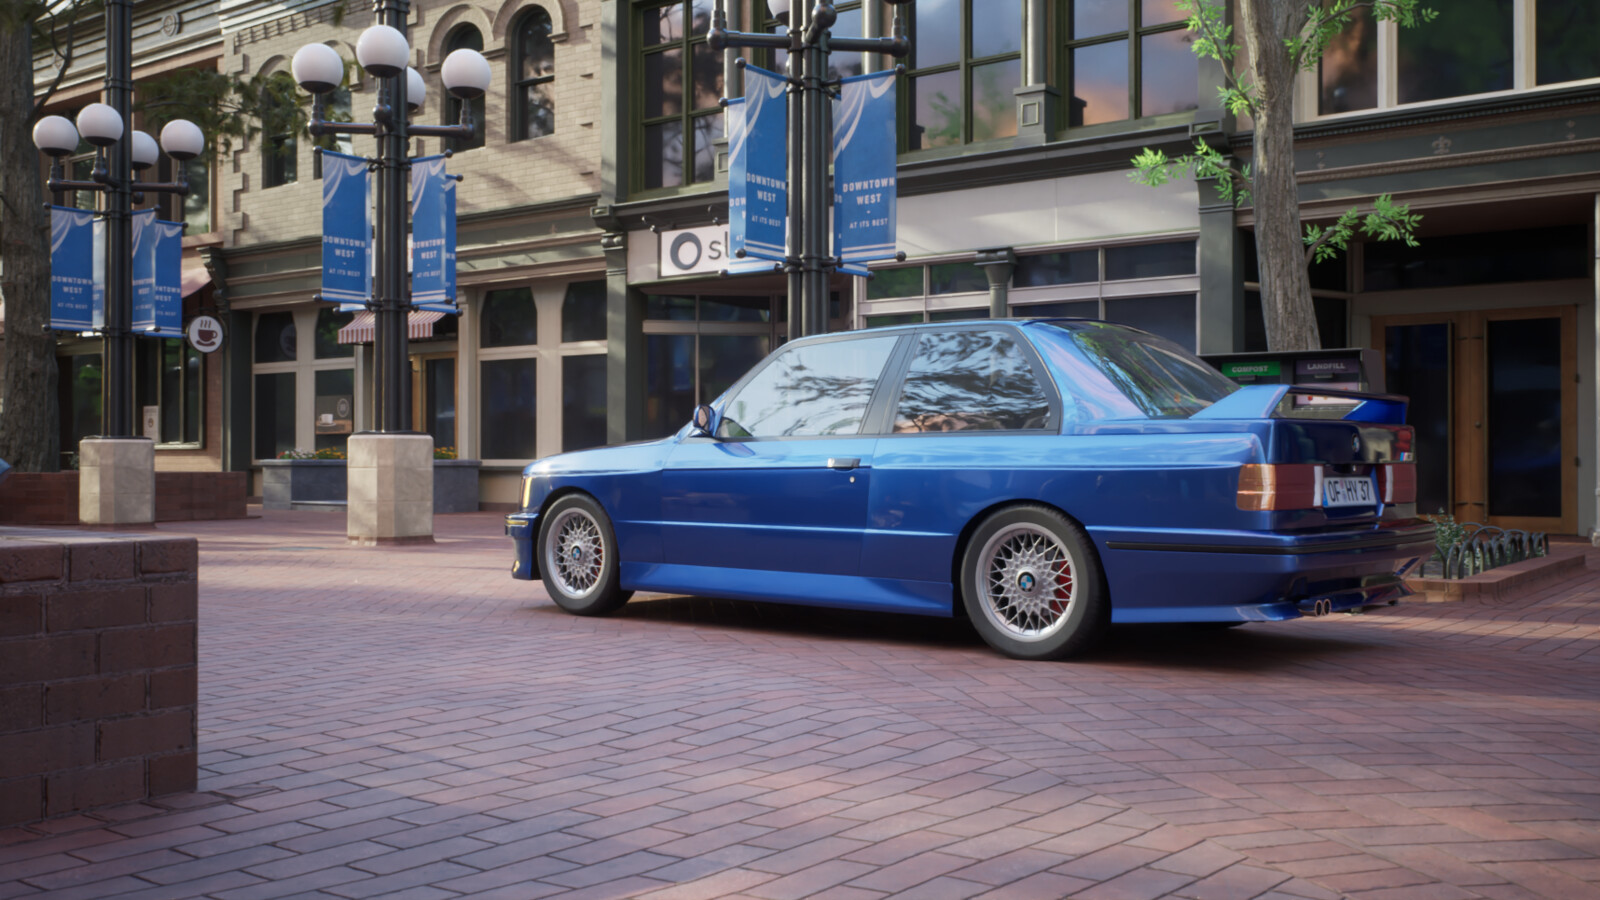 e30 m3 is from sketchfab Lexyc16